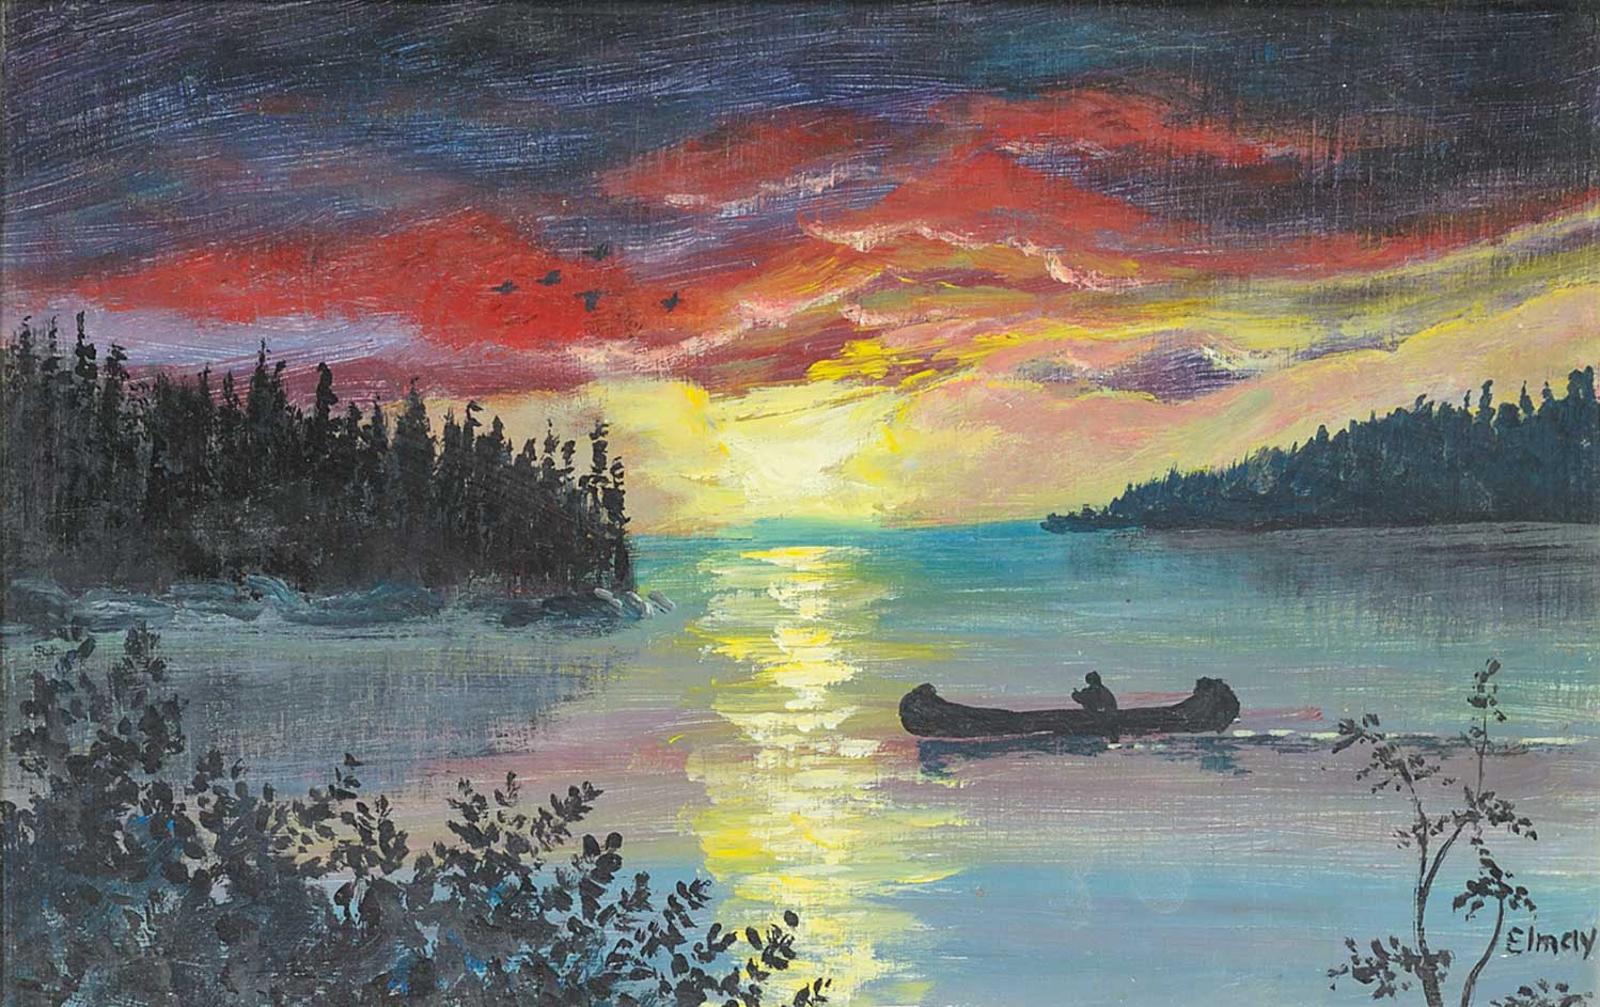 Elmay Crow - Untitled - Canoeing at Sunset